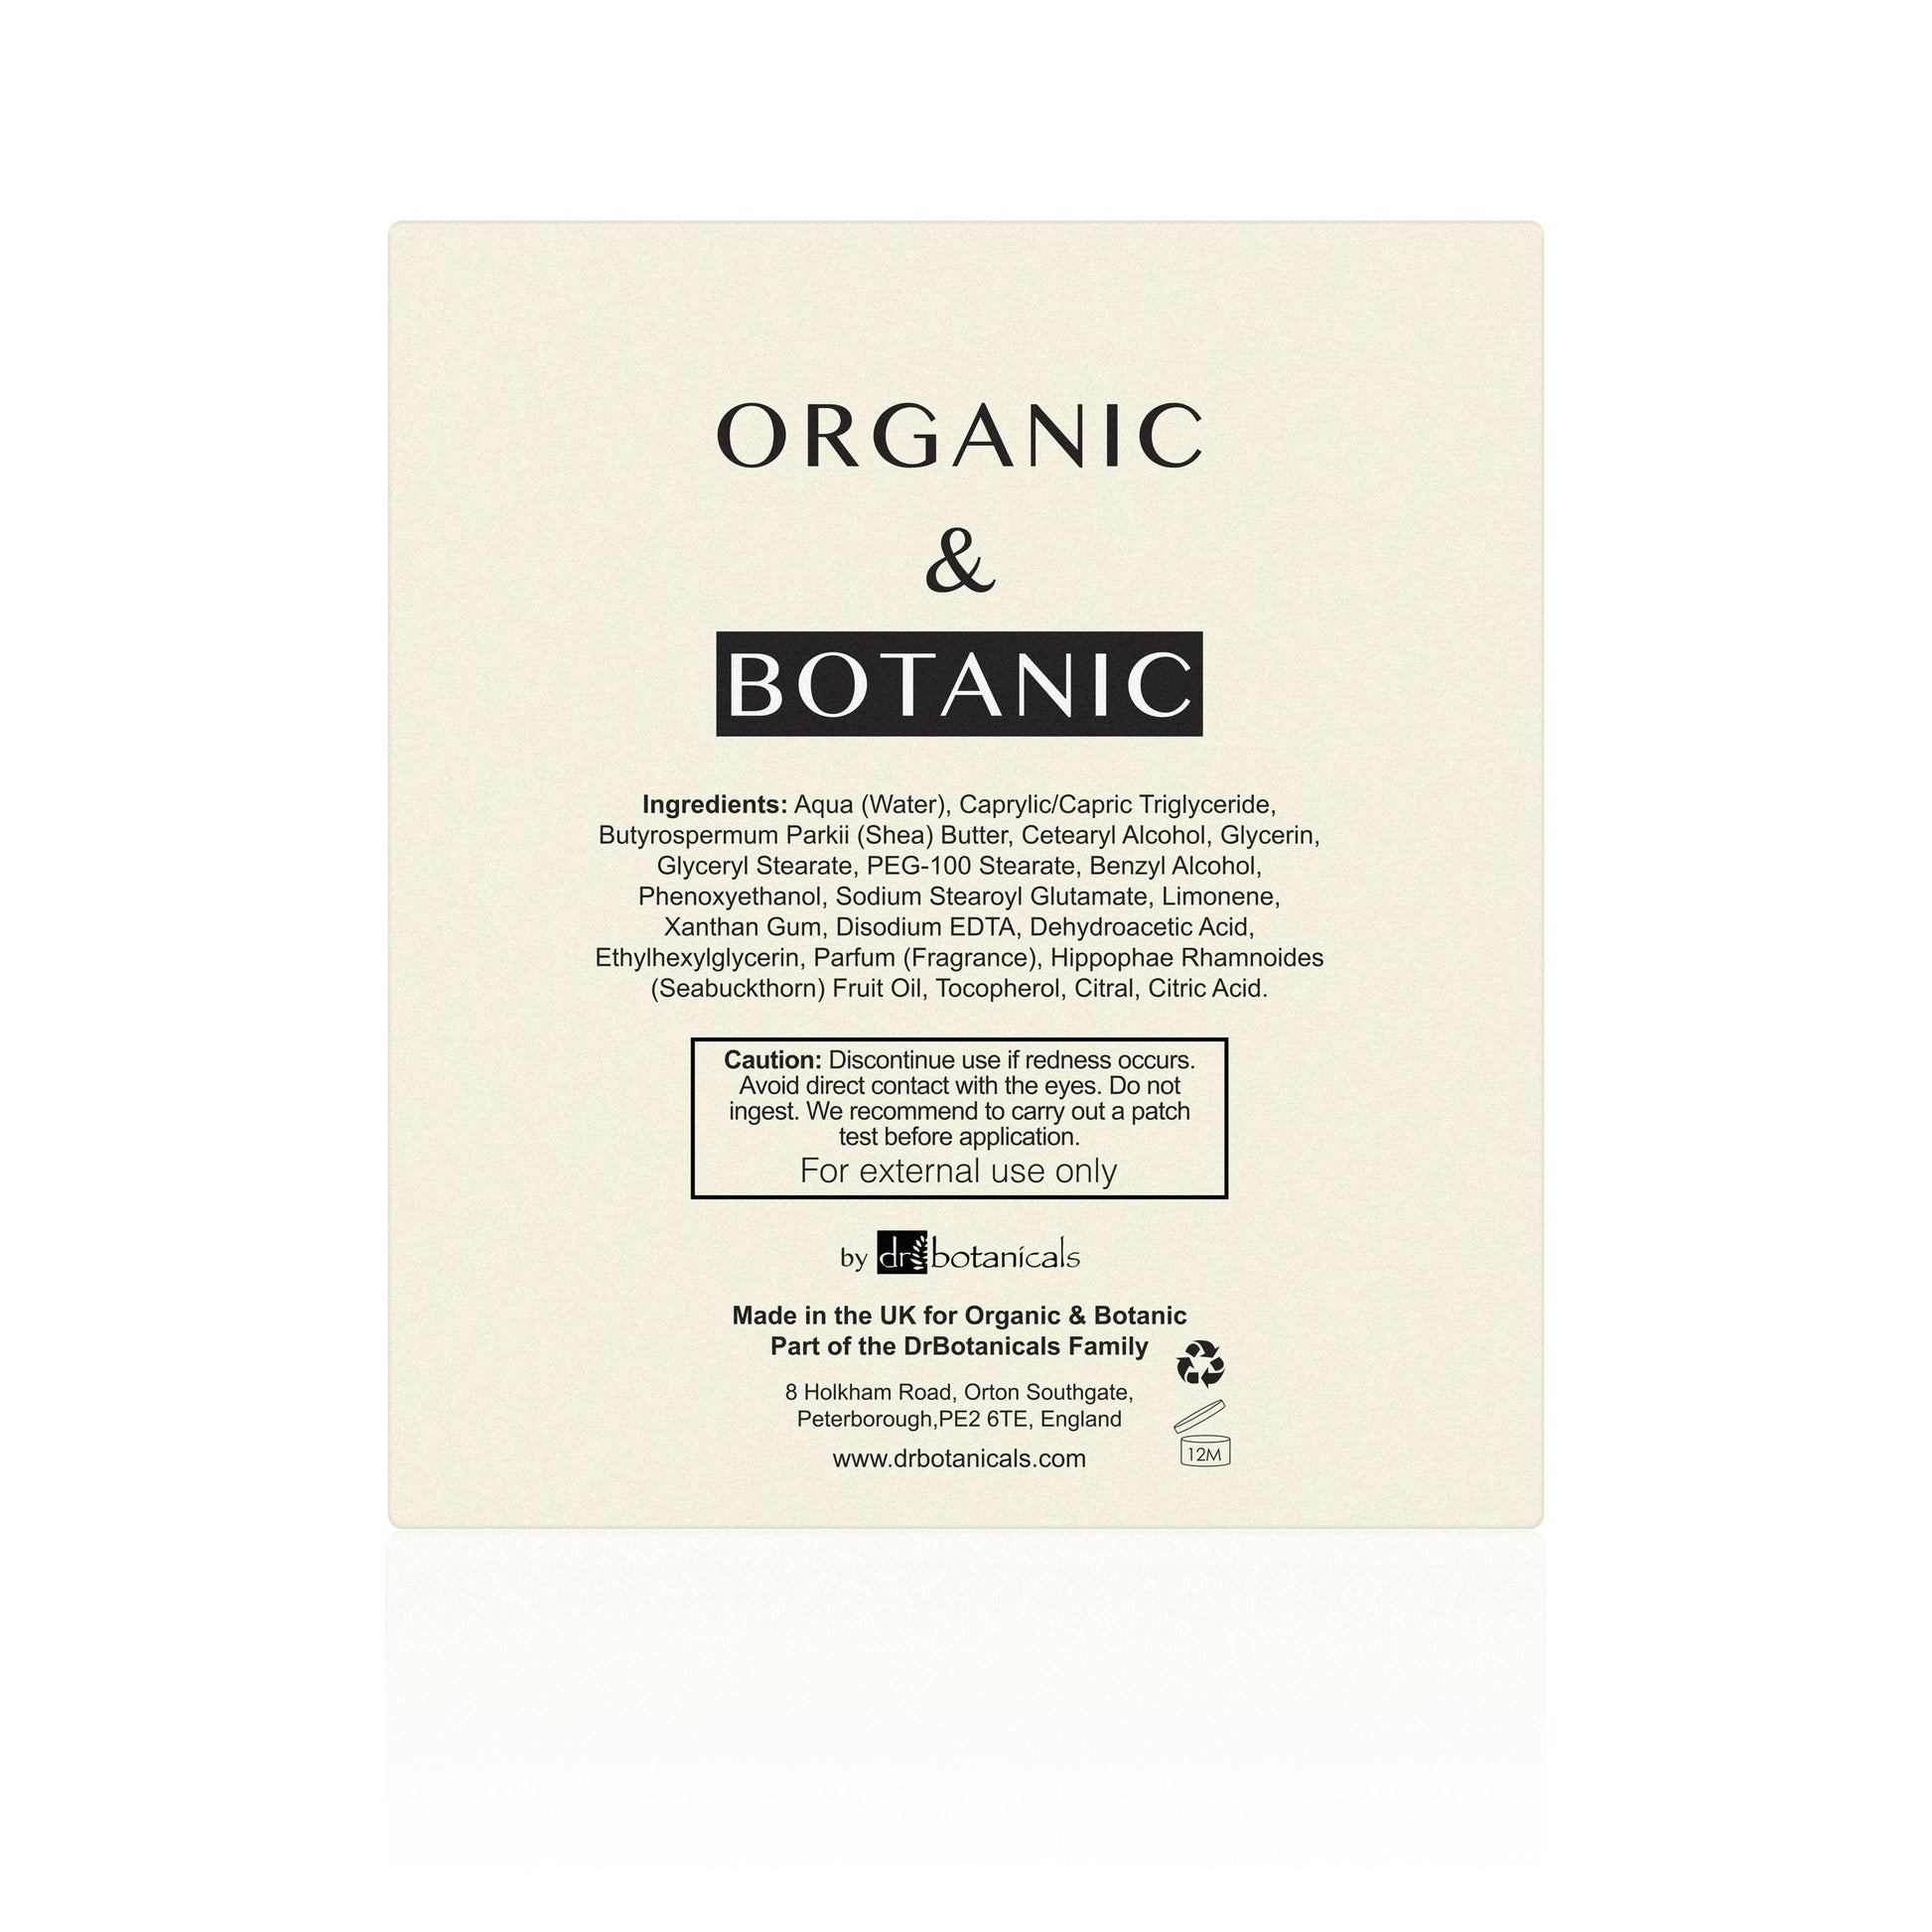 Limited Edition Amazonian Berry Shea Butter Body Cream - Dr. Botanicals Skincare